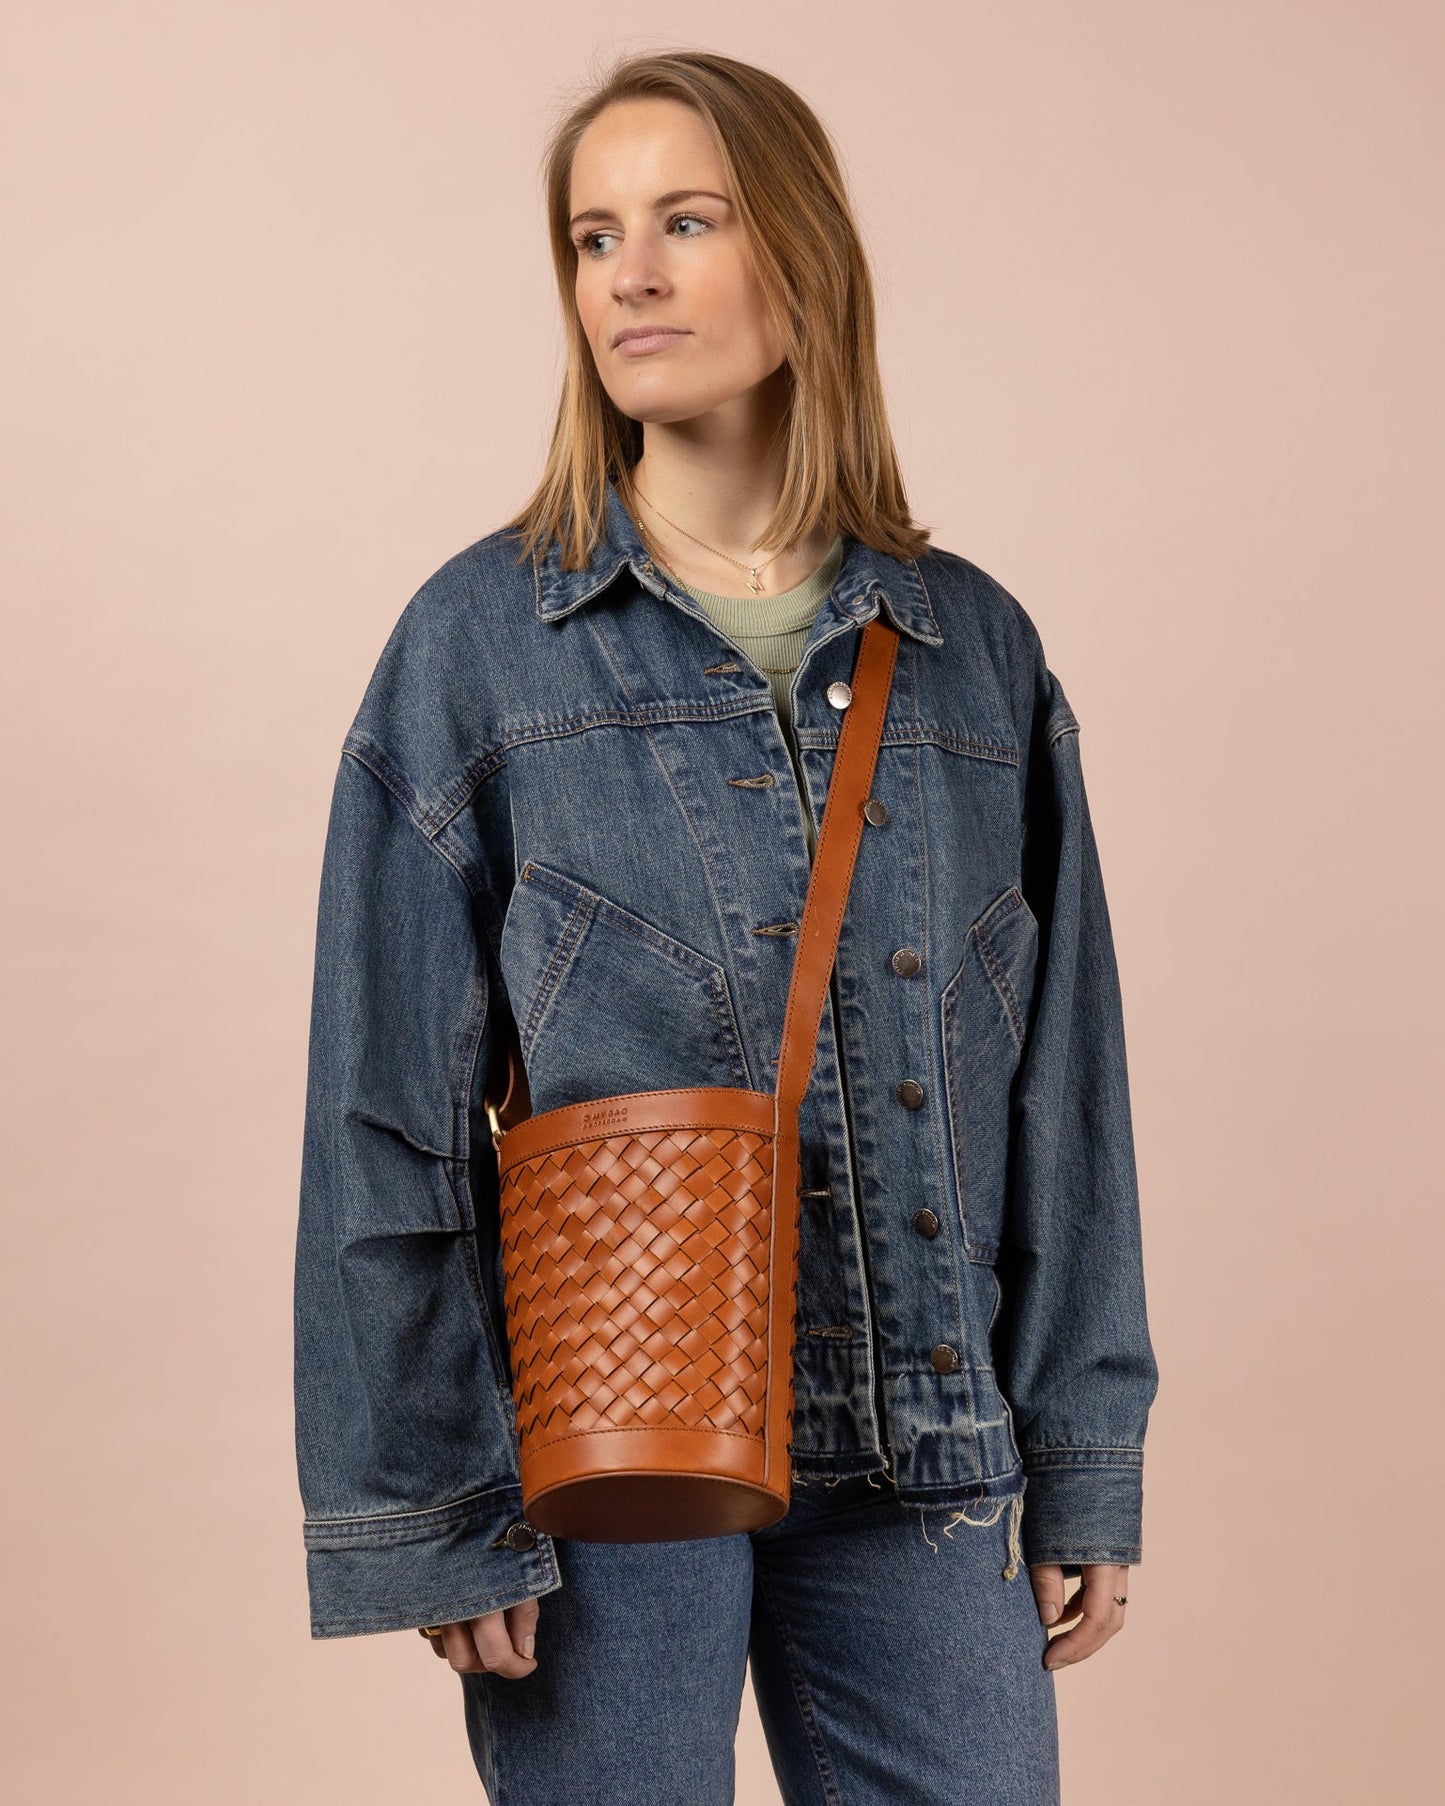 o my bag / With a round design, drawstring closure, and an adjustable leather strap, Zola adapts effortlessly to your style. Inside, find a zipper pocket and slip pocket for organization. Zola transitions seamlessly from shoulder to cross-body. Ethically made in India.